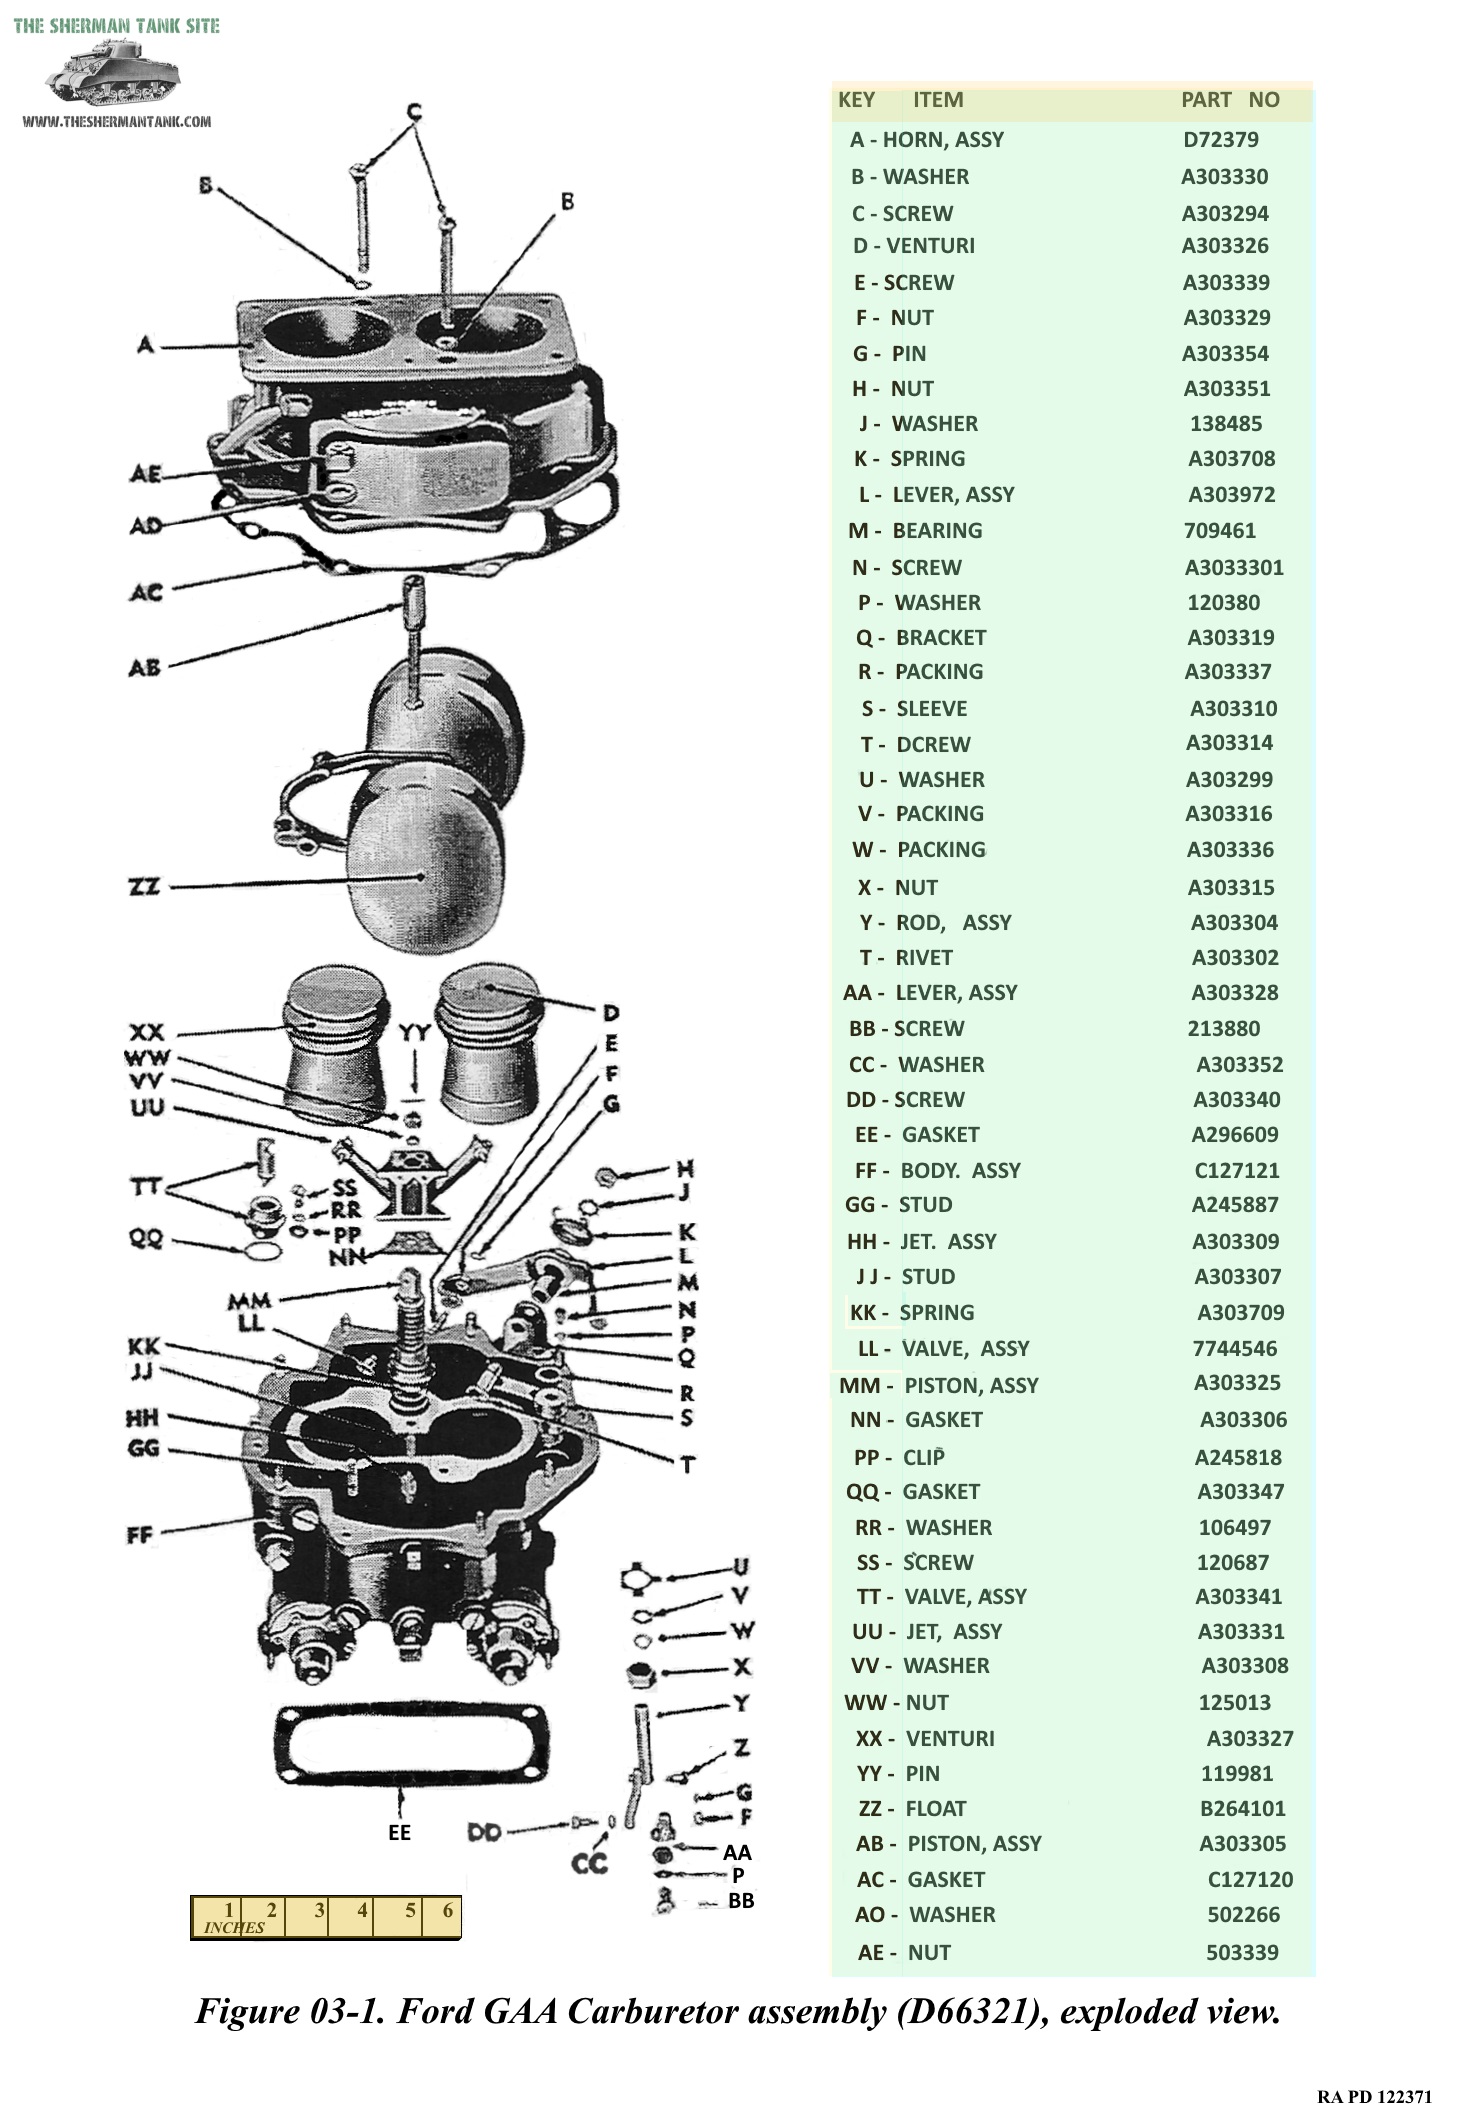 Carbureter-exploxed-view-d66321-improved